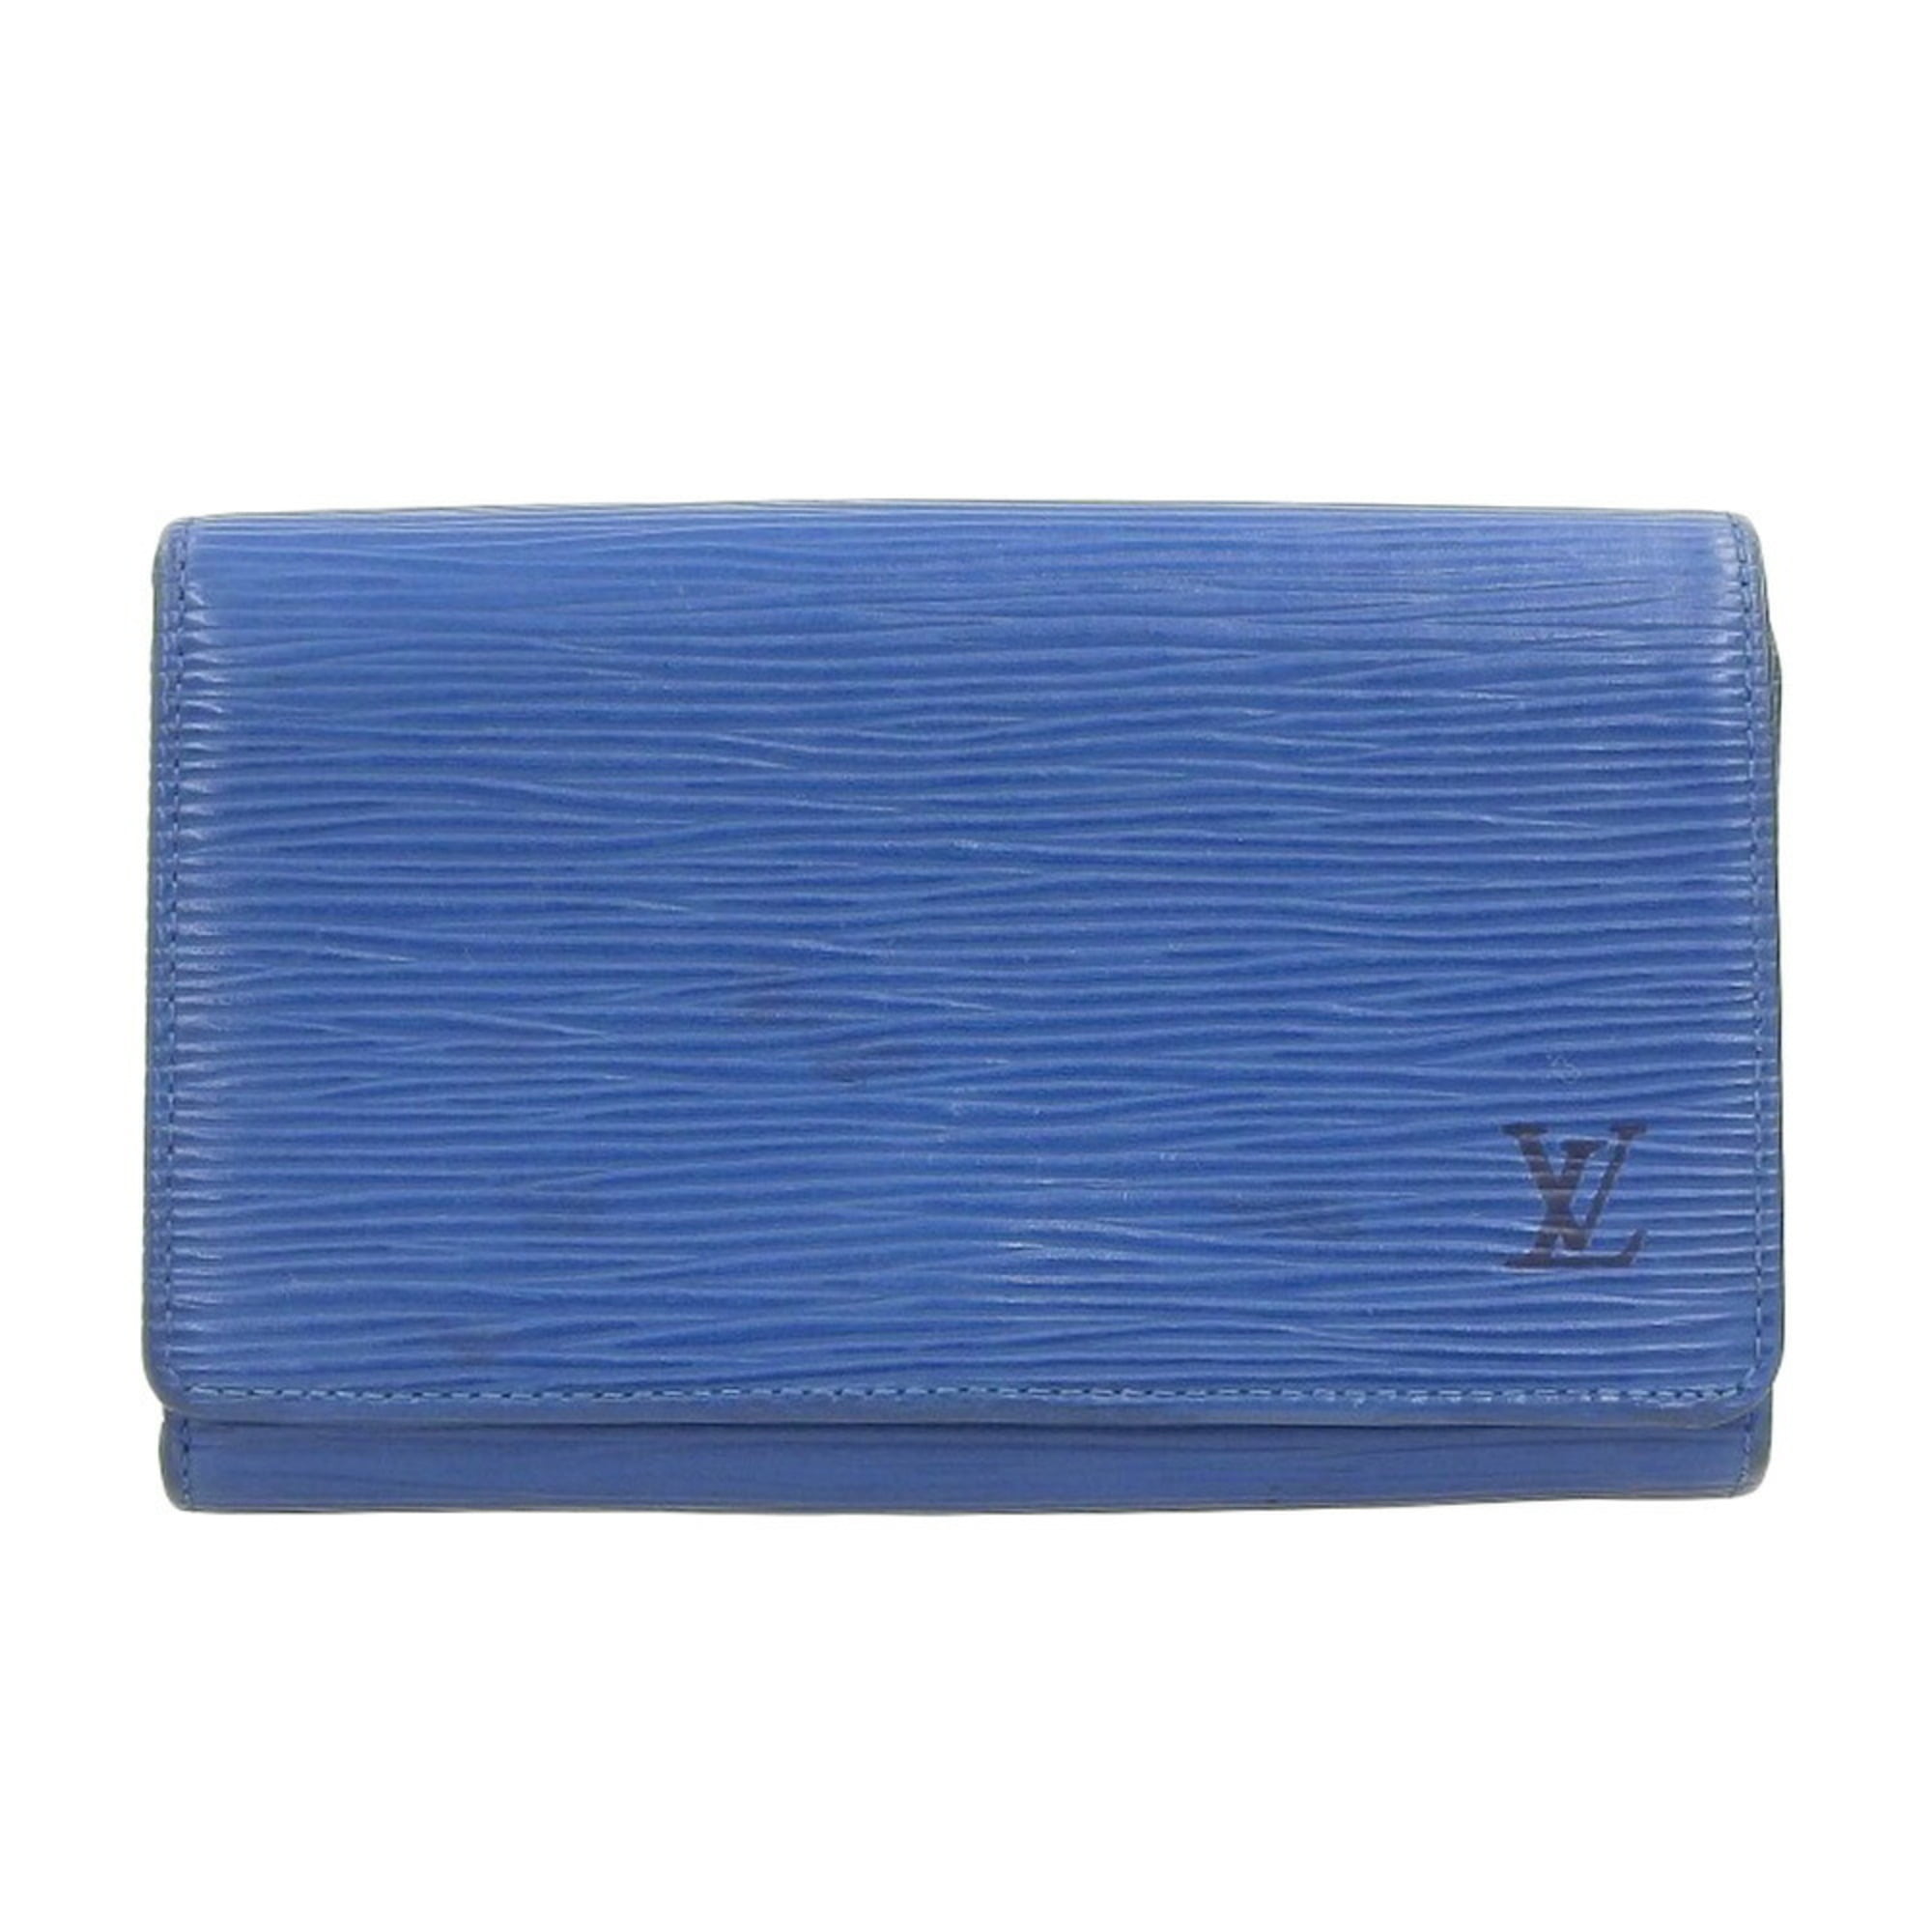 Buy Louis Vuitton LOUISVUITTON Size:- M62978 Portefeuille Pance Taiga Money Clip  Wallet from Japan - Buy authentic Plus exclusive items from Japan